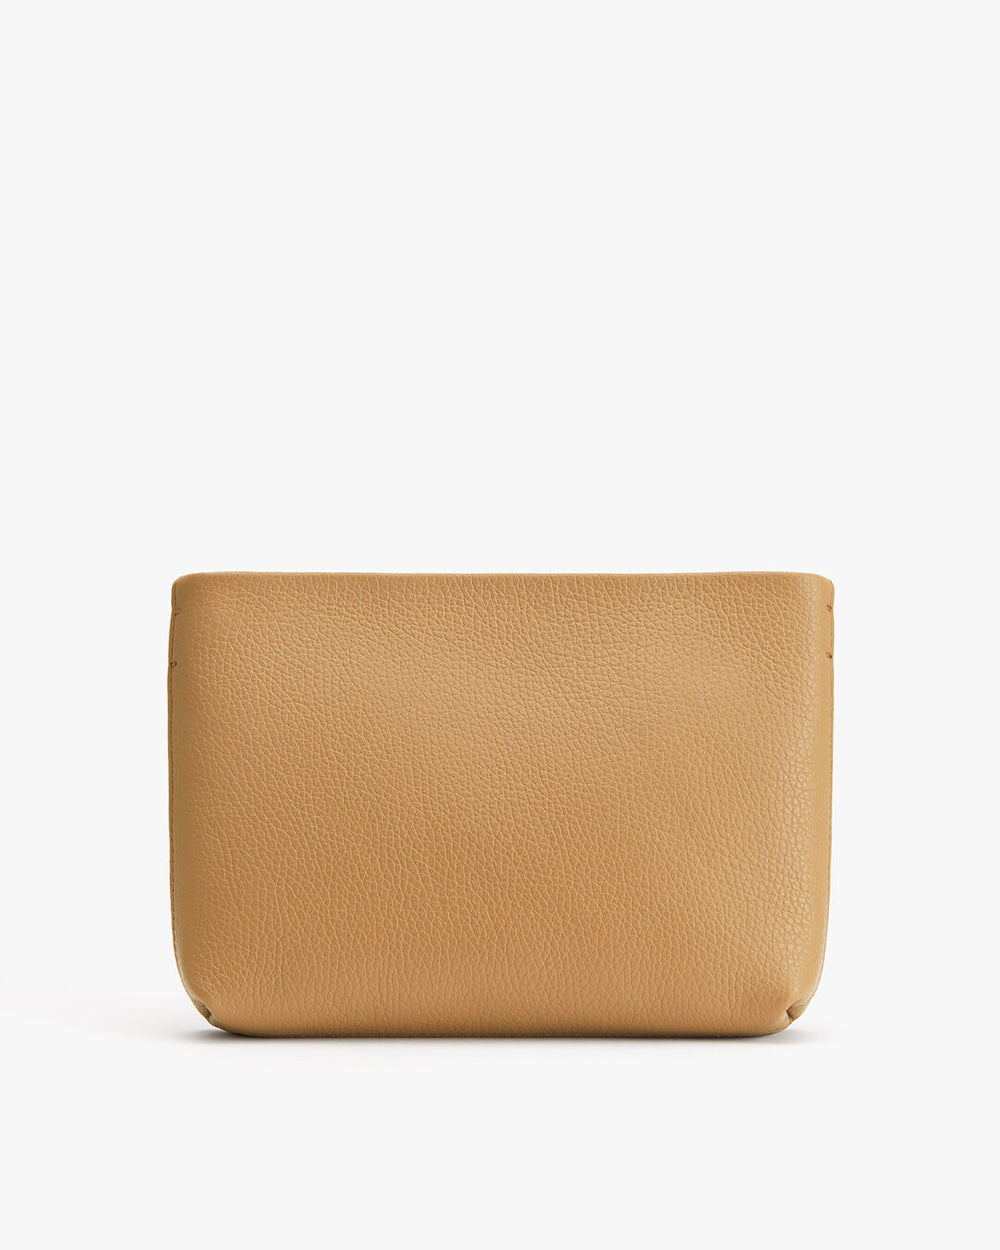 A textured rectangular pouch standing upright against a plain background.